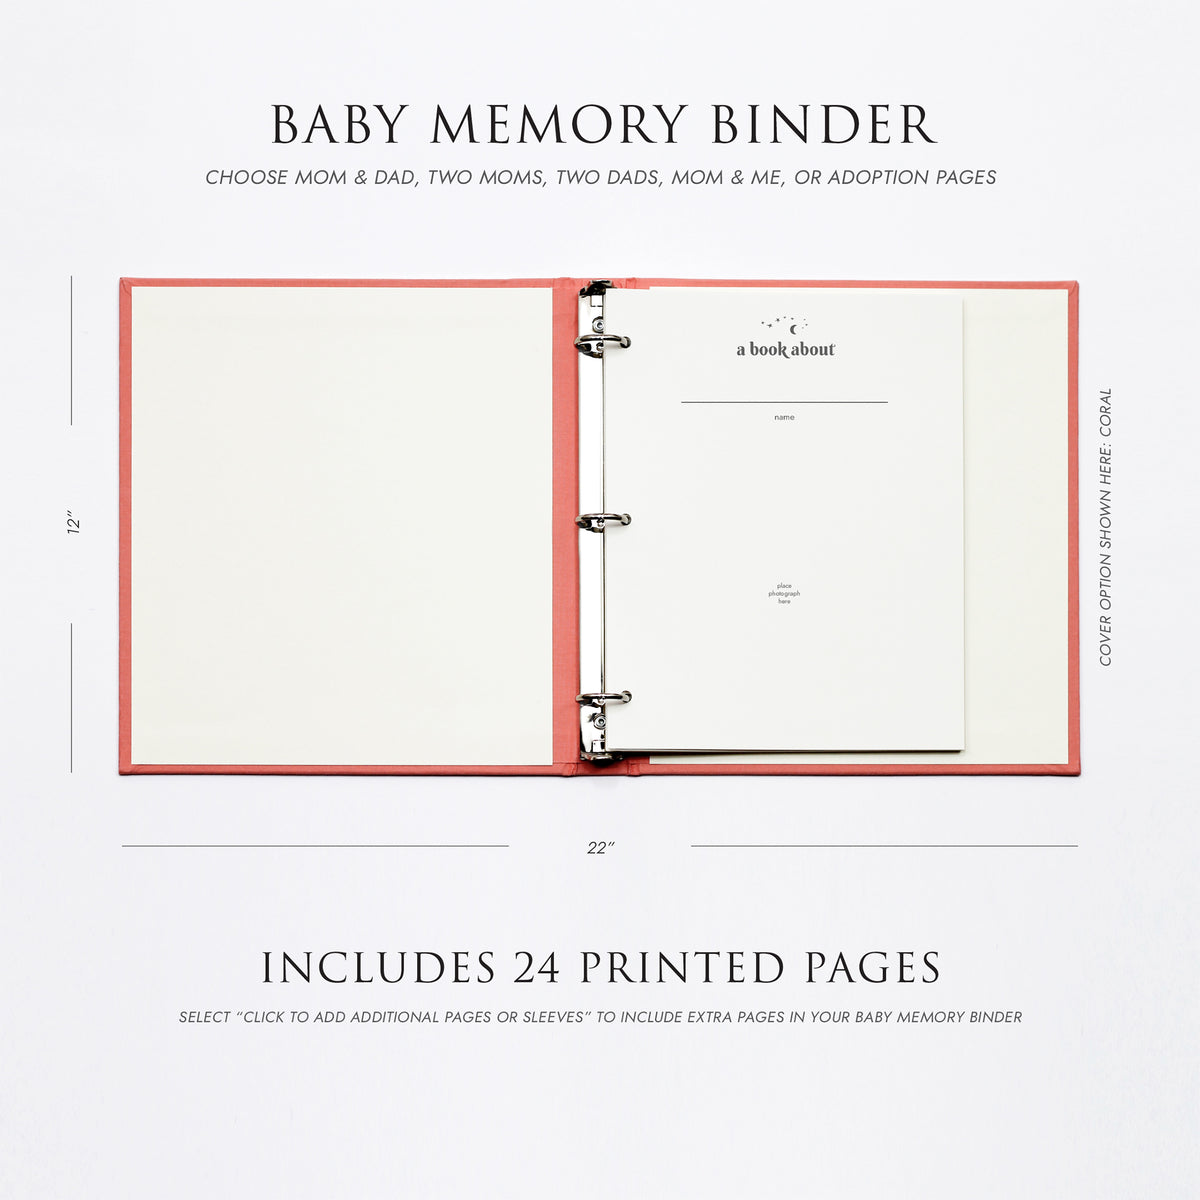 Personalized Baby Memory Binder with Pastel Blue Cover | Select Your Own Pages